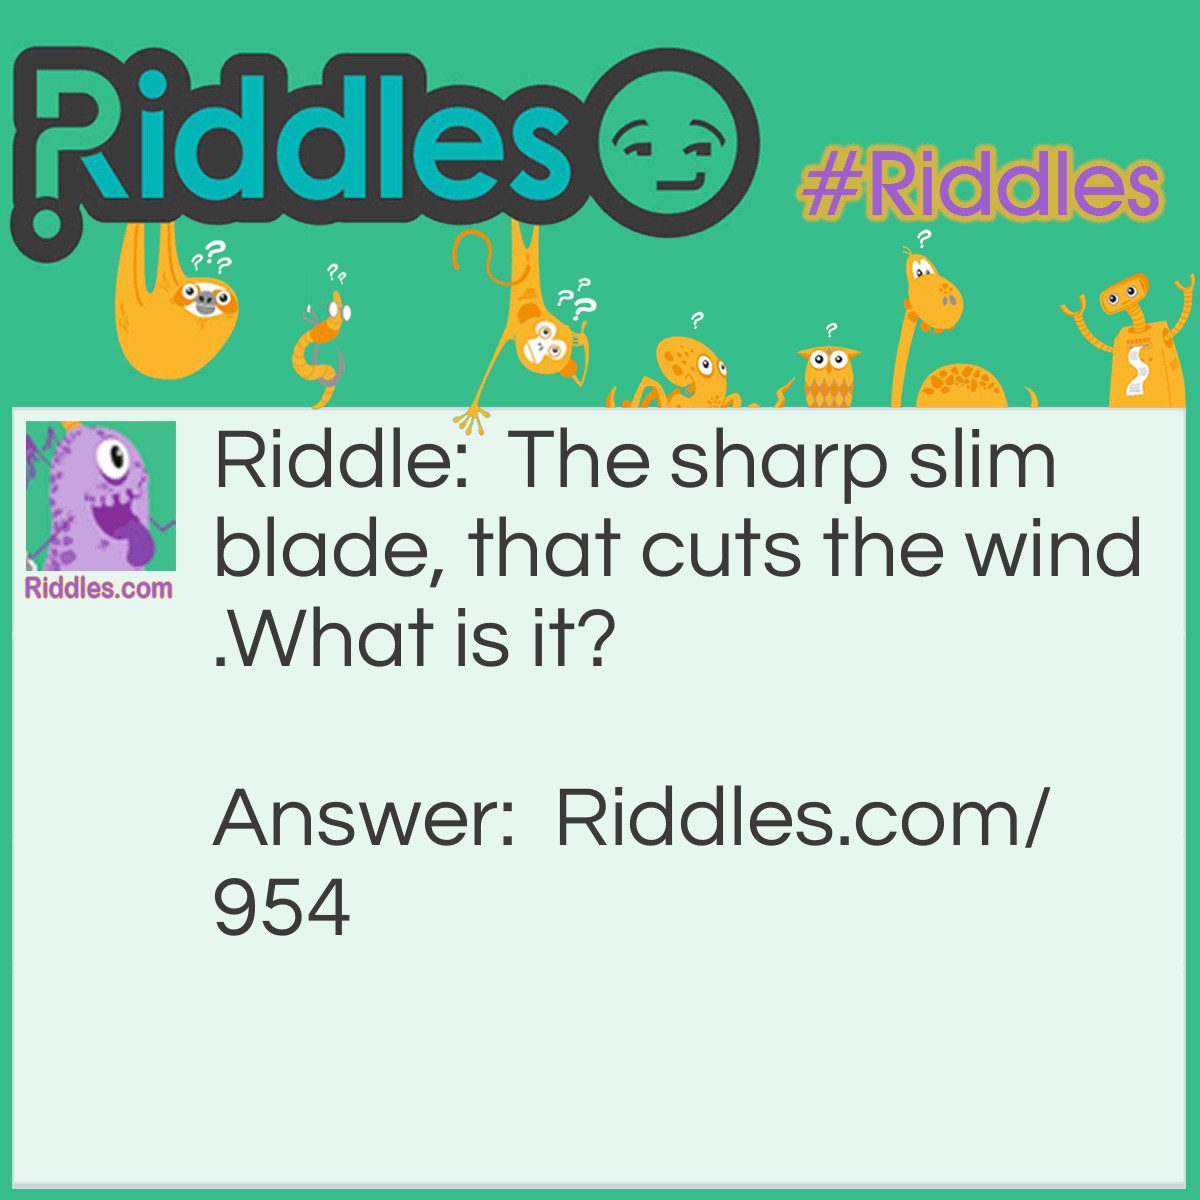 Riddle: The sharp slim blade, that cuts the wind.
What is it? Answer: A blade of grass.